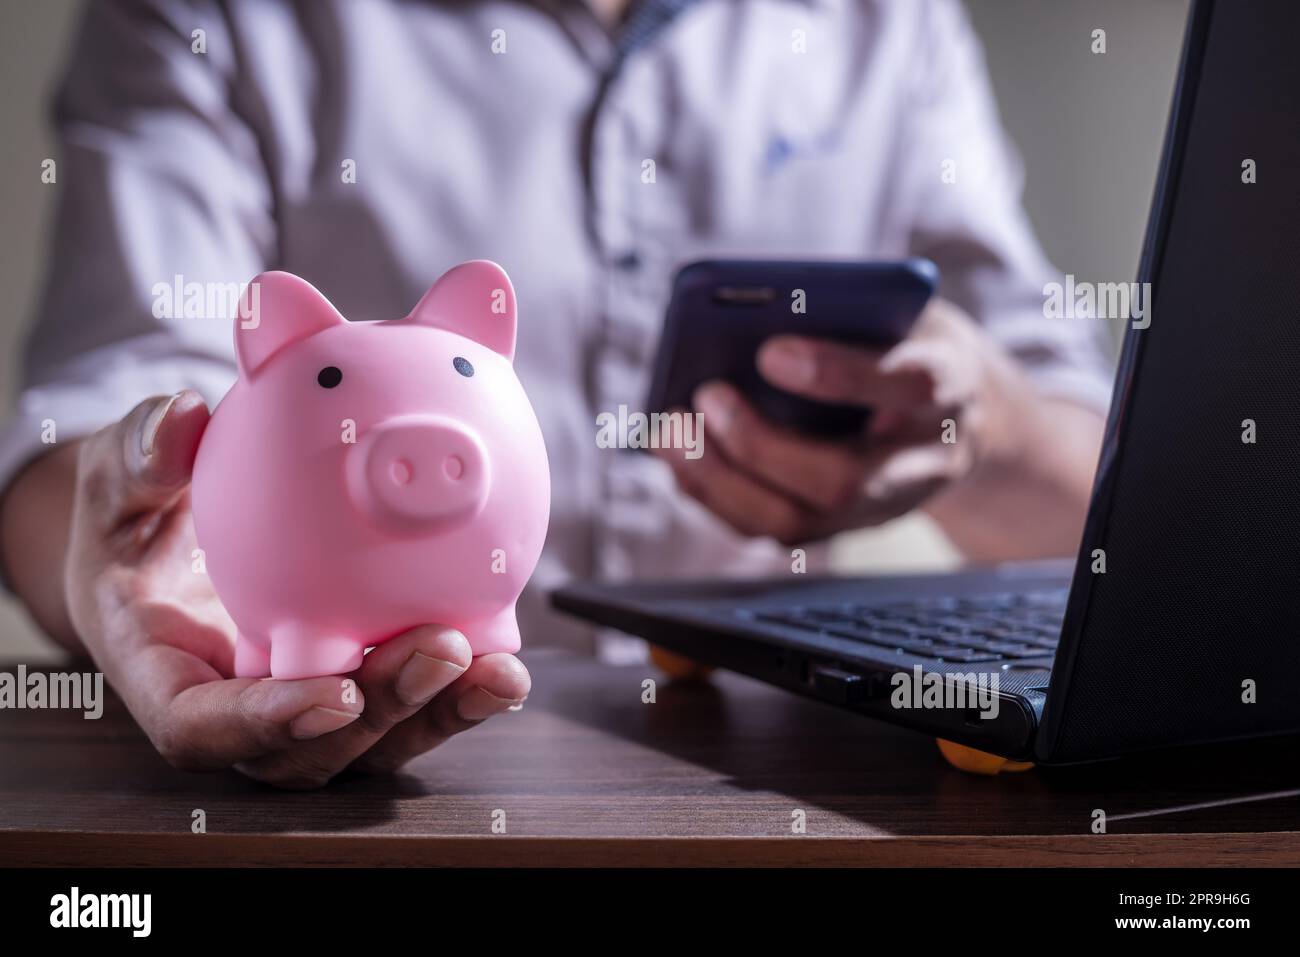 Online Banking And Internet Banking Savings Concept Stock Photo